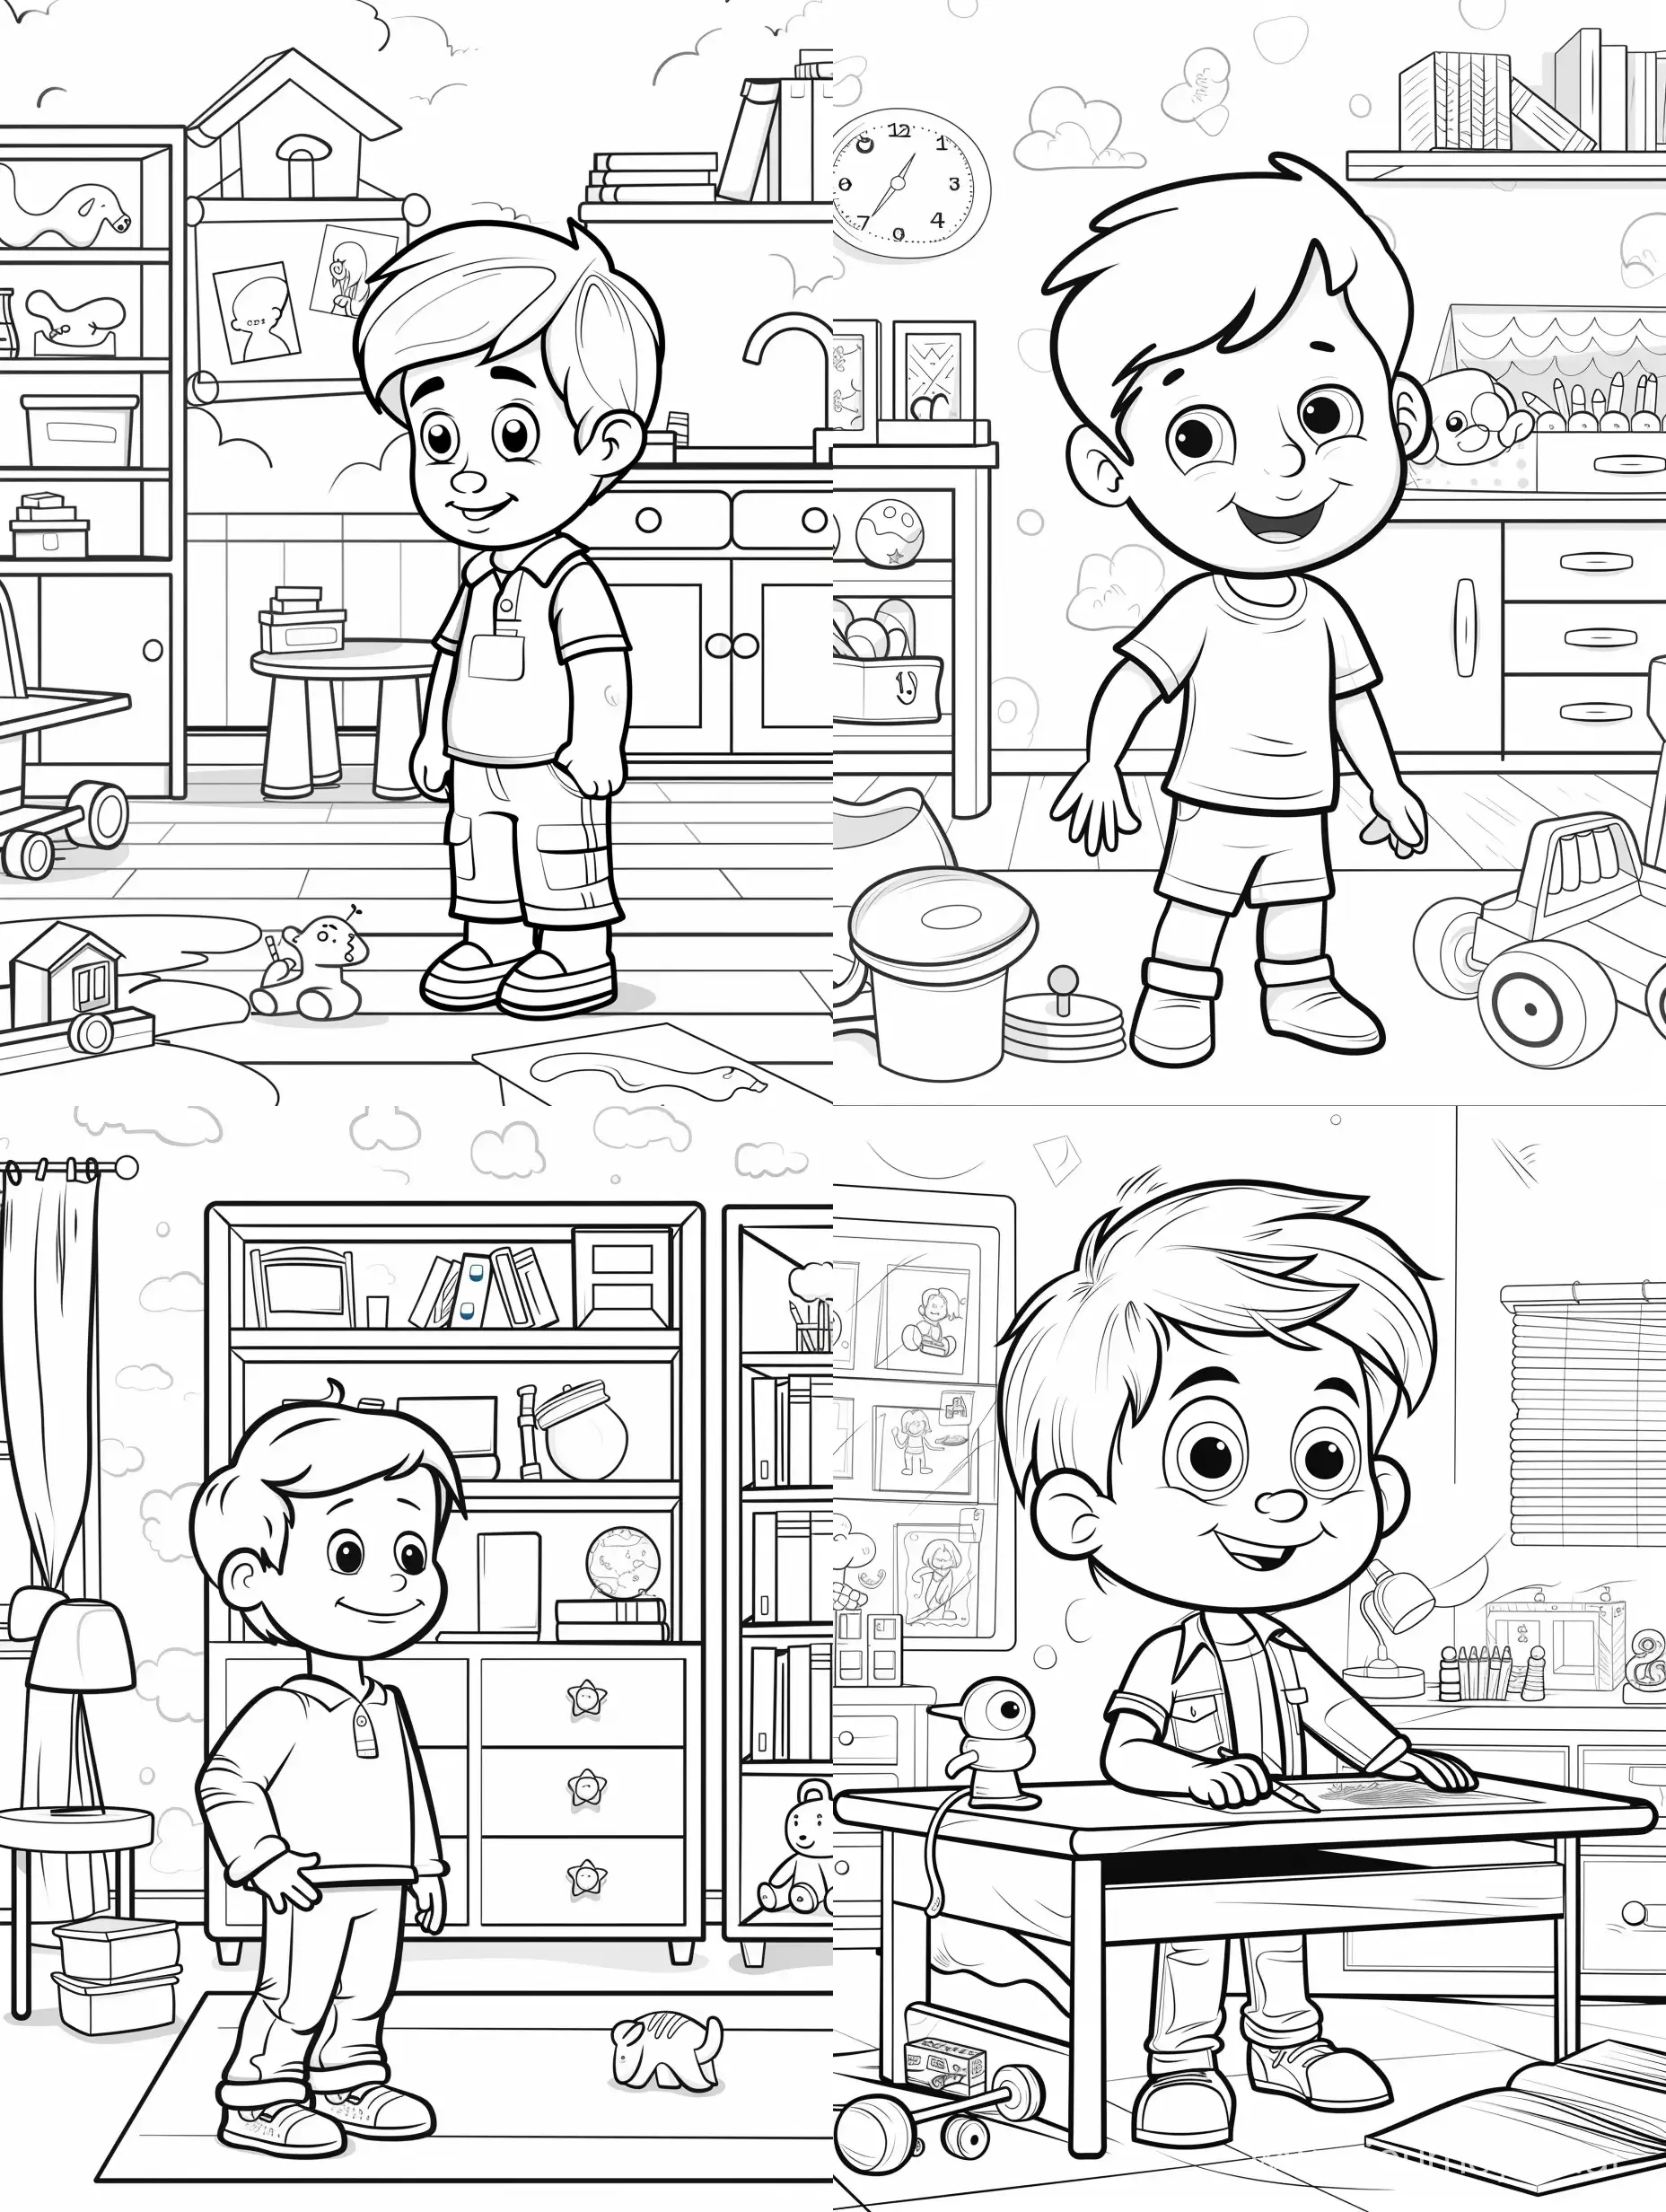 coloring page for kids, detailed, simply cartoon style, isolated, funny, happy child in playroom